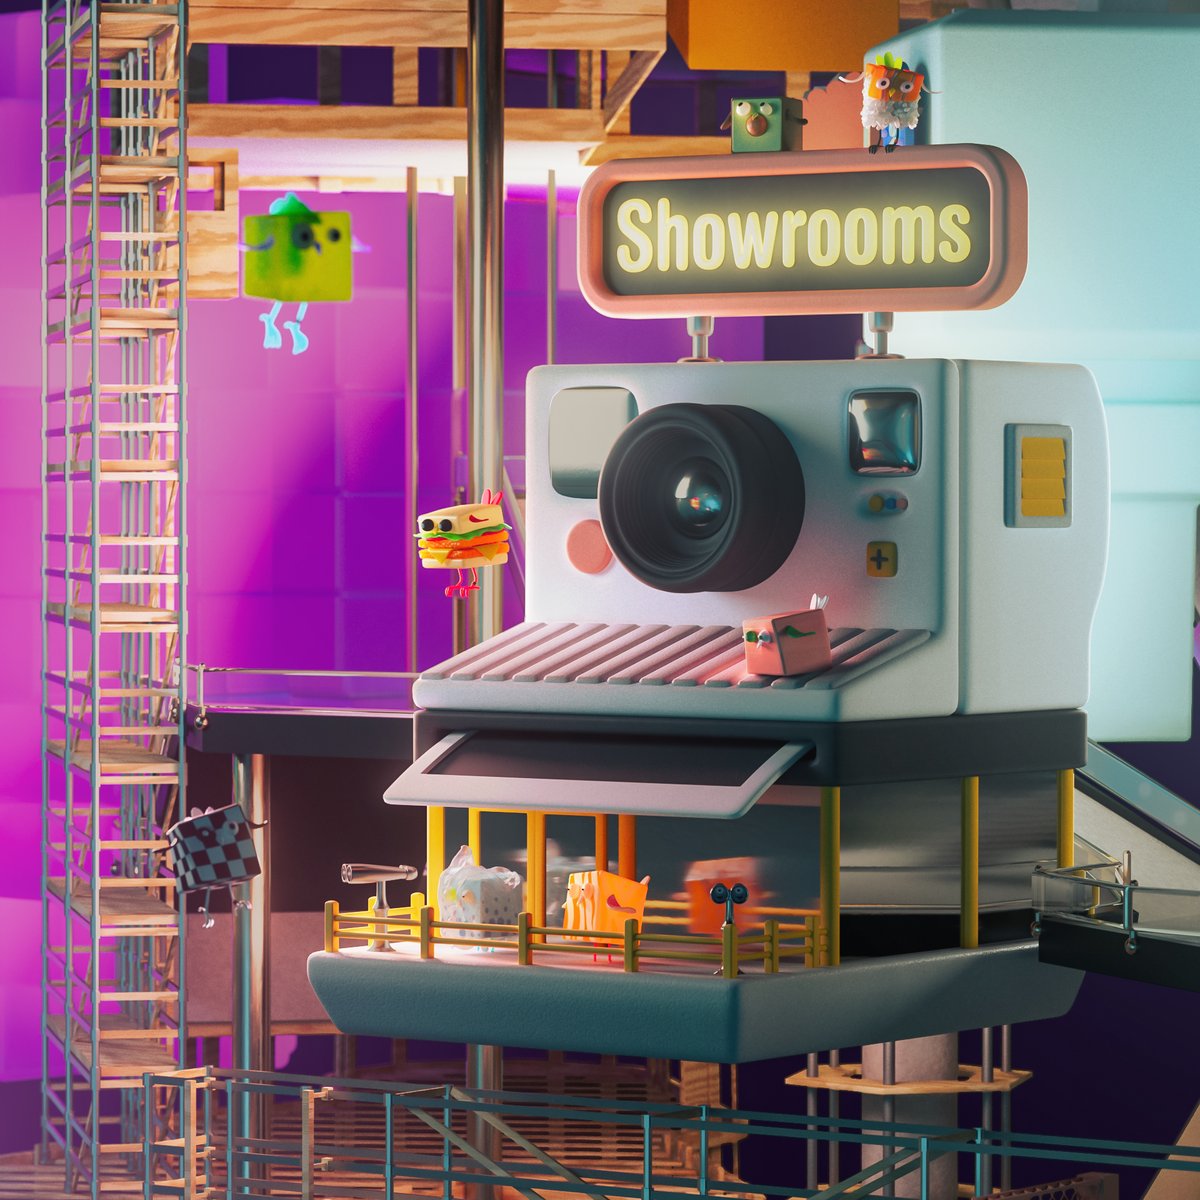 Drumroll, please 🥁 Nest's next update is just around the corner, introducing Showrooms! An easy way to flex your BlockOwls collections to the world. Stay tuned for the big reveal!